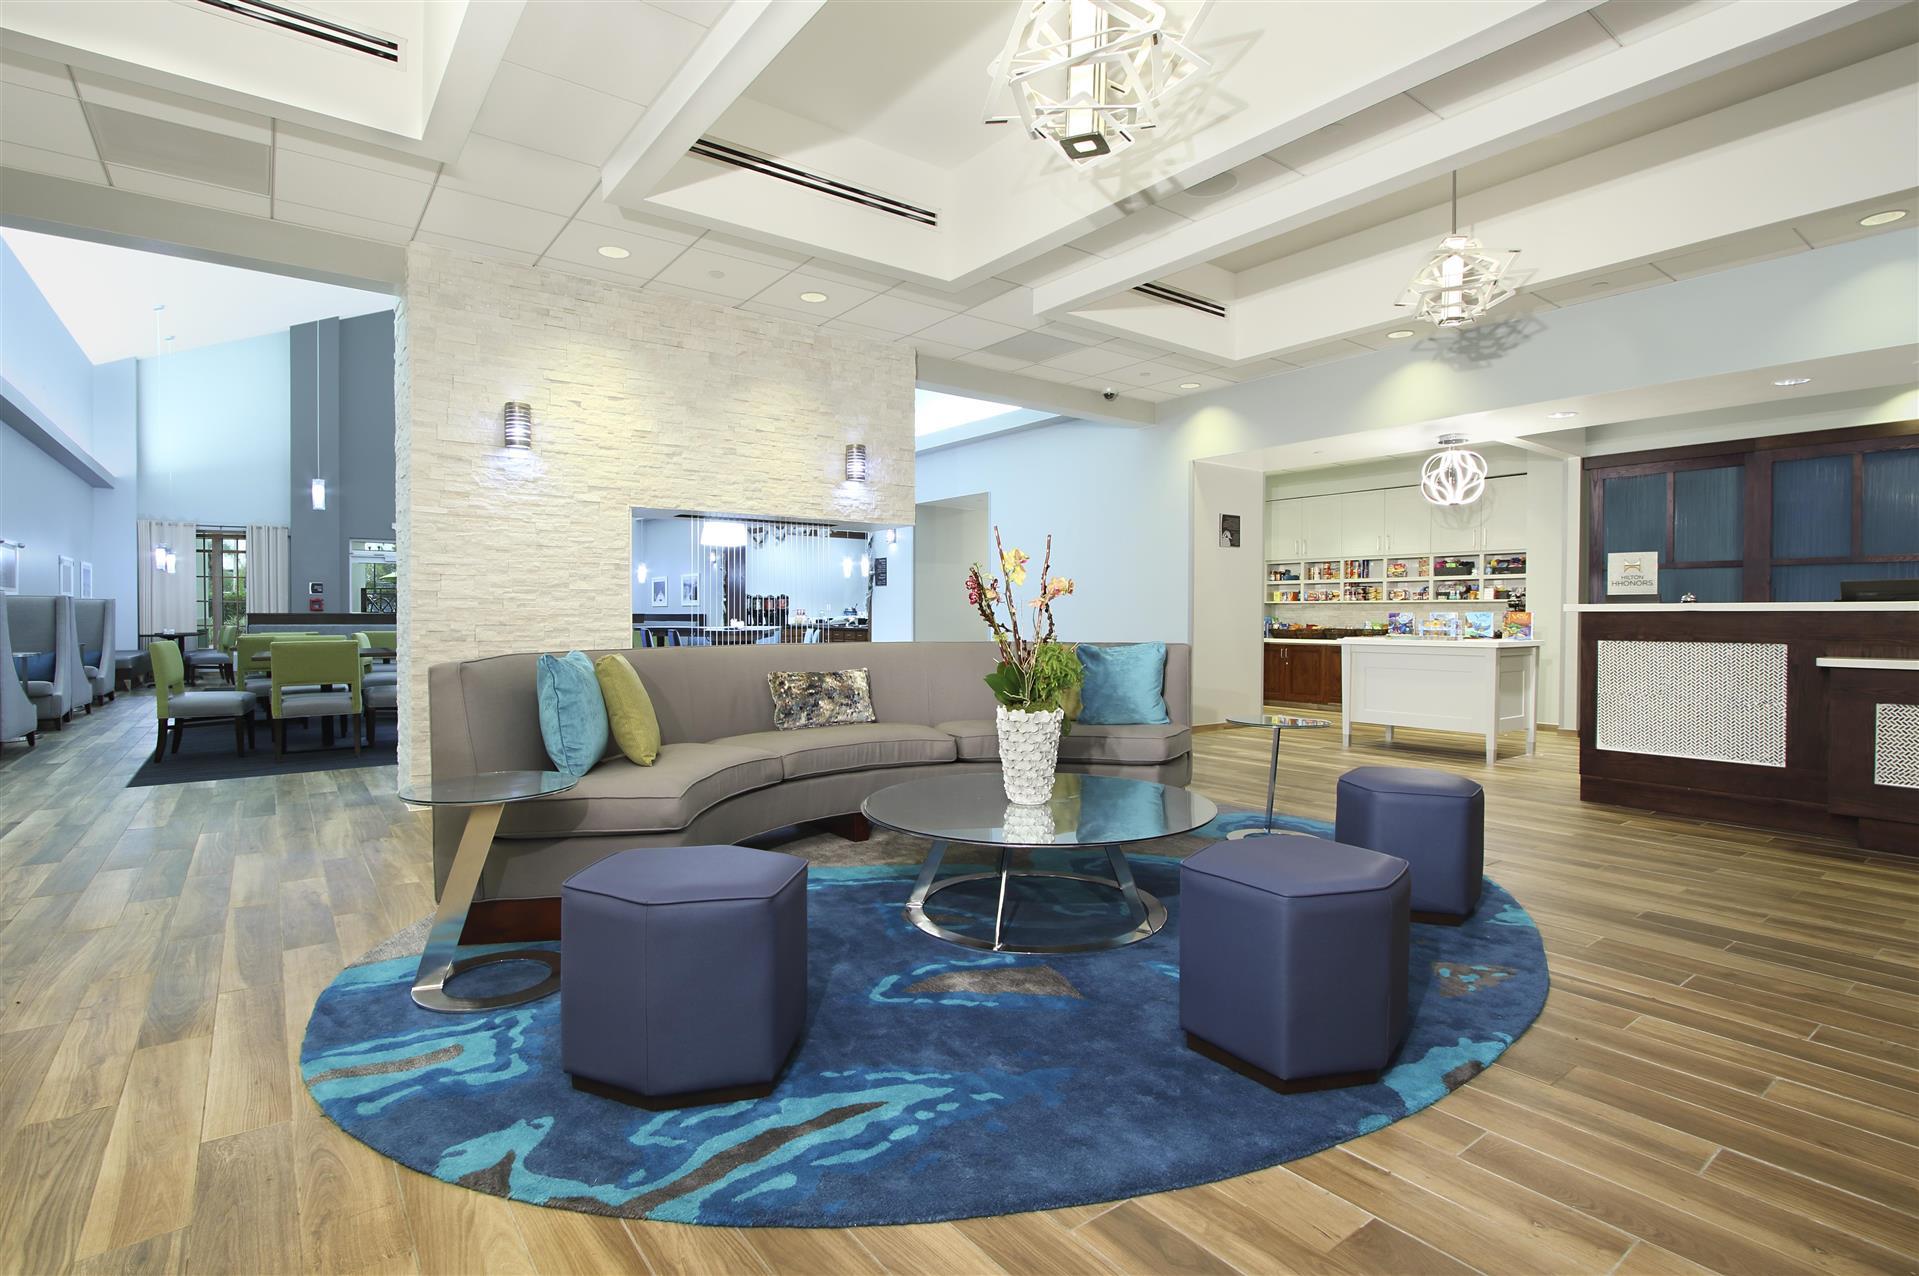 Homewood Suites by Hilton Miami - Airport West in Miami, FL